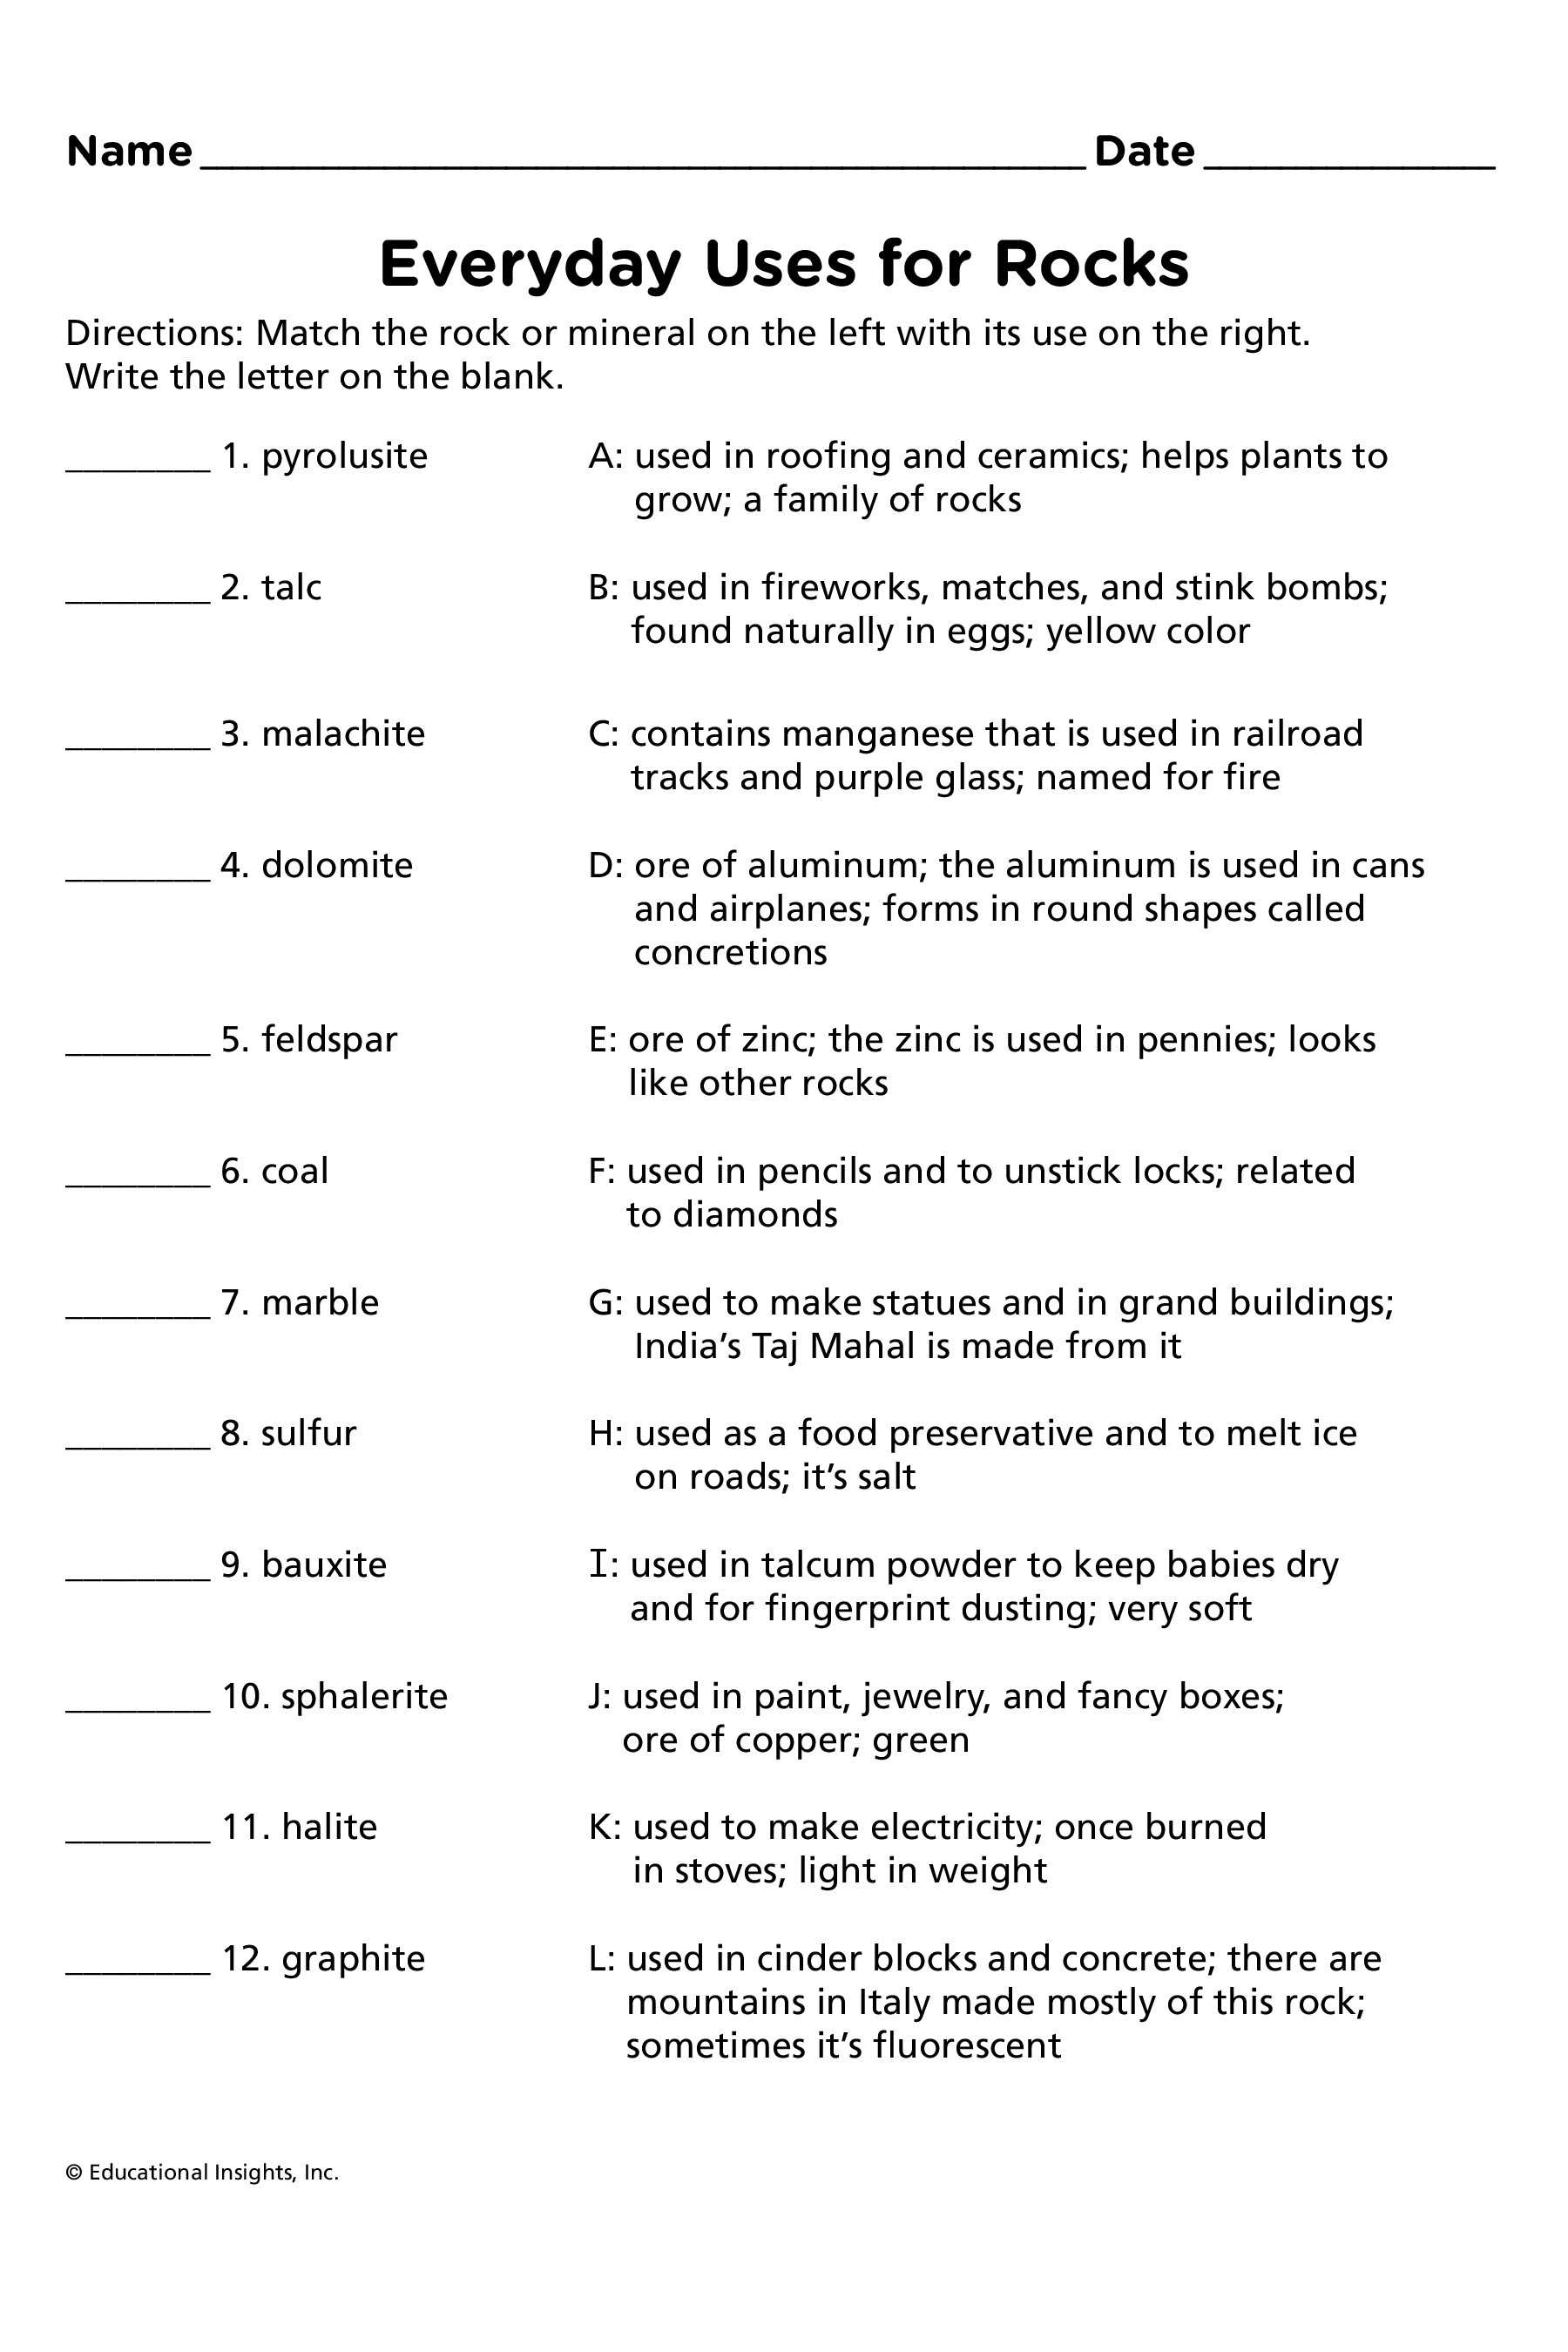 Food Inc Movie Worksheet Answer Key Also Food Inc Worksheet with Answers Fresh Everyday Uses Rock & Card Set